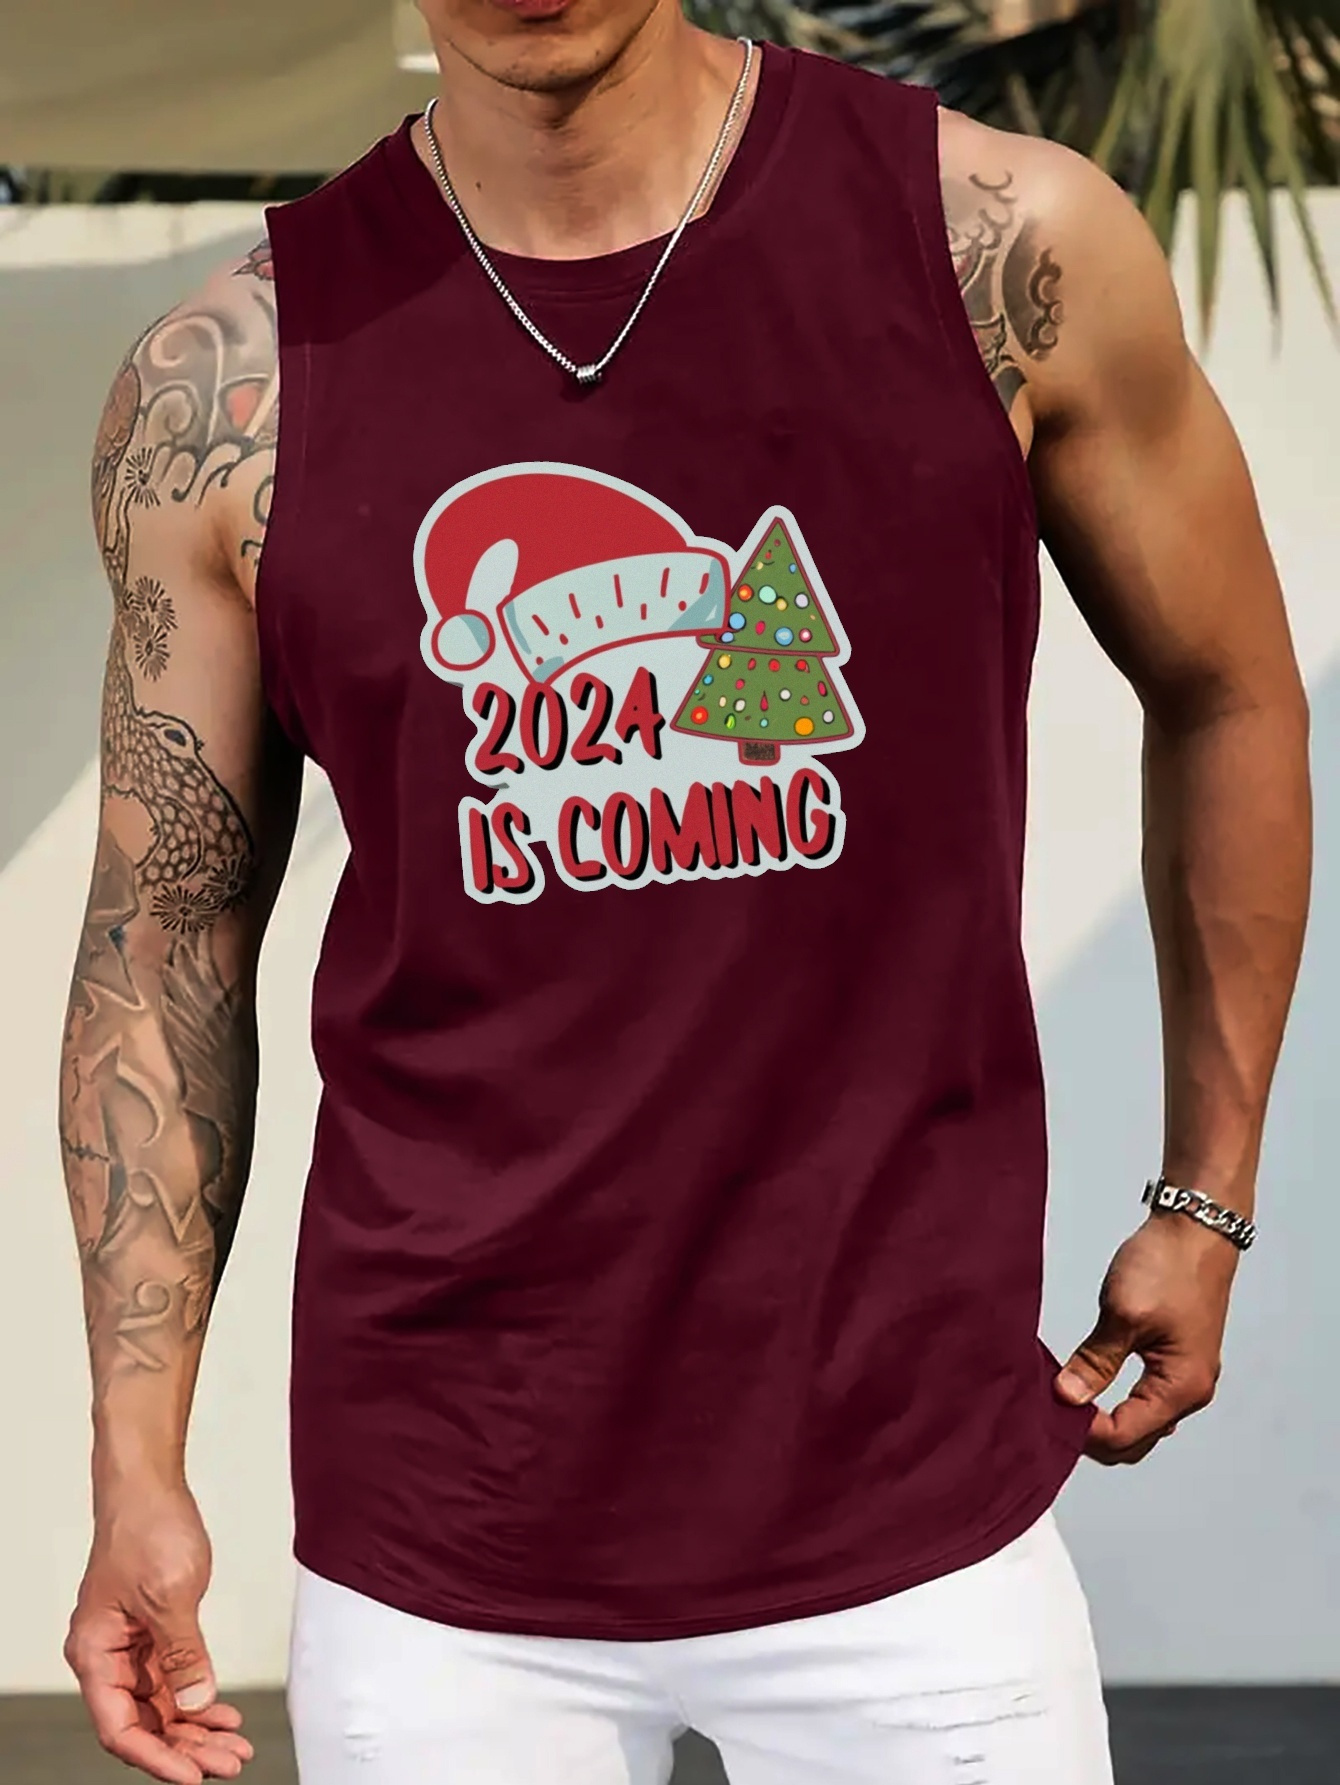 Santa claus in red pants and tank top pulling up Vector Image